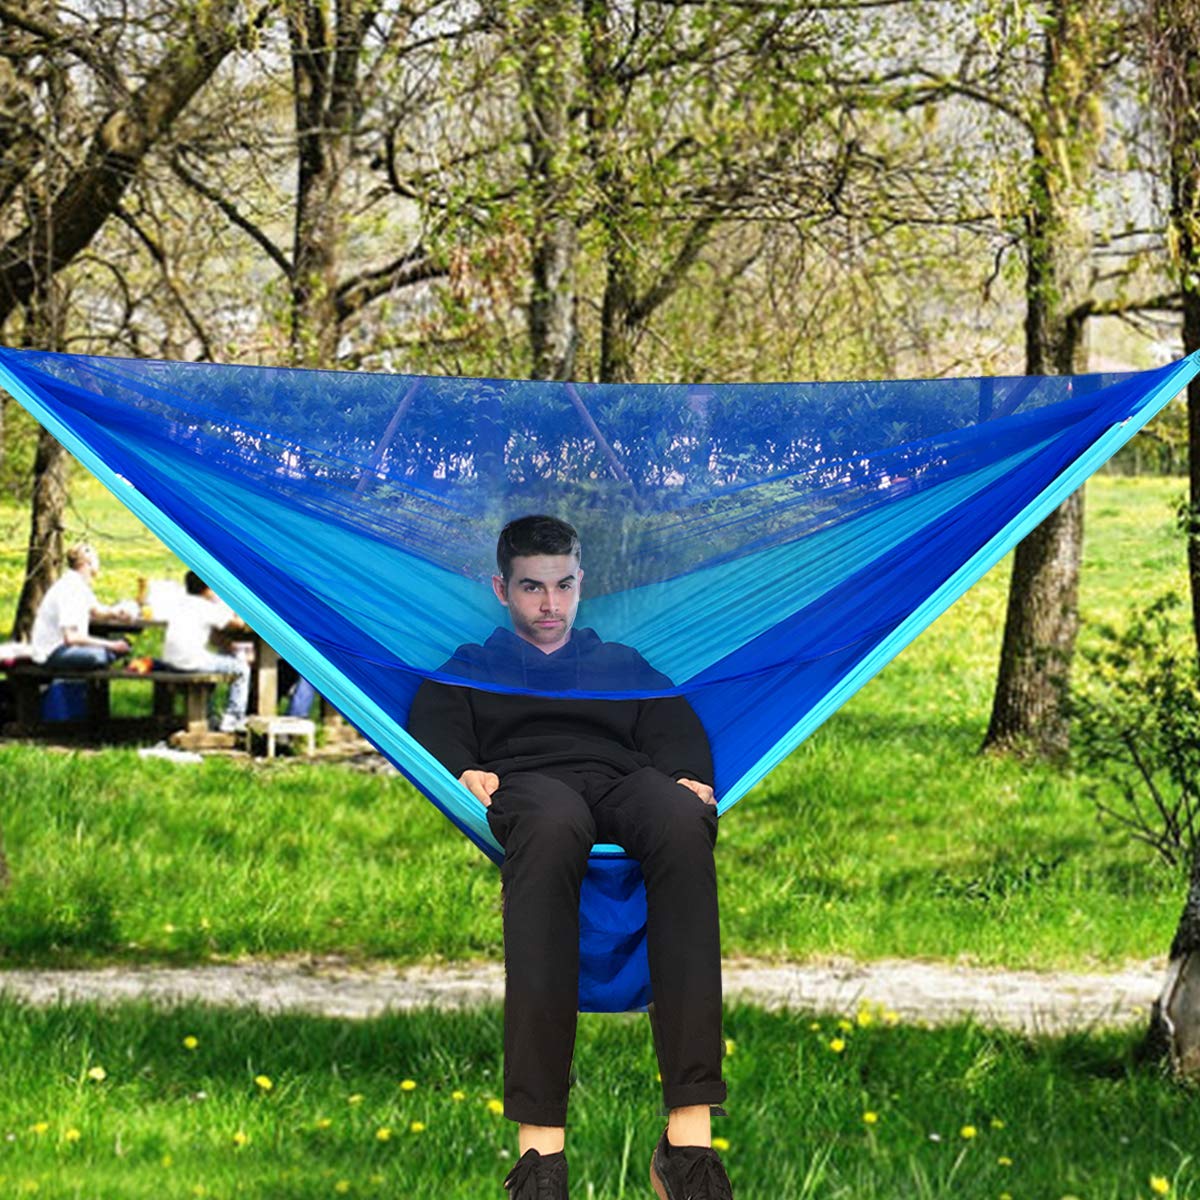 Net Mosquito with Camping Hammock - Yuede